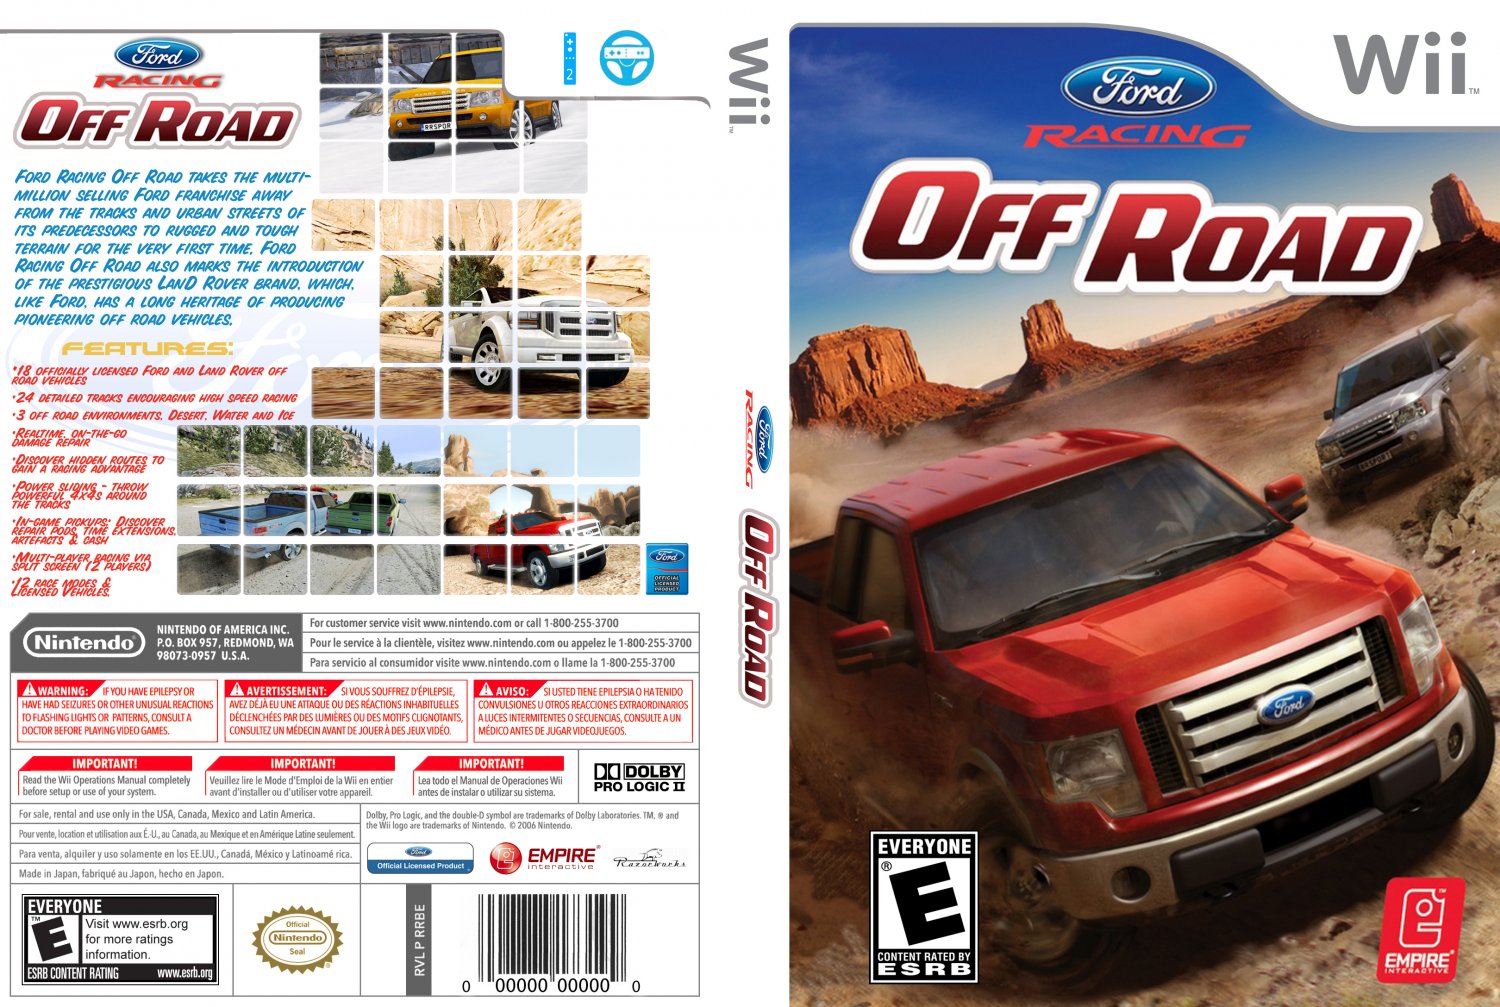 Game ford racing - off road - wii #7